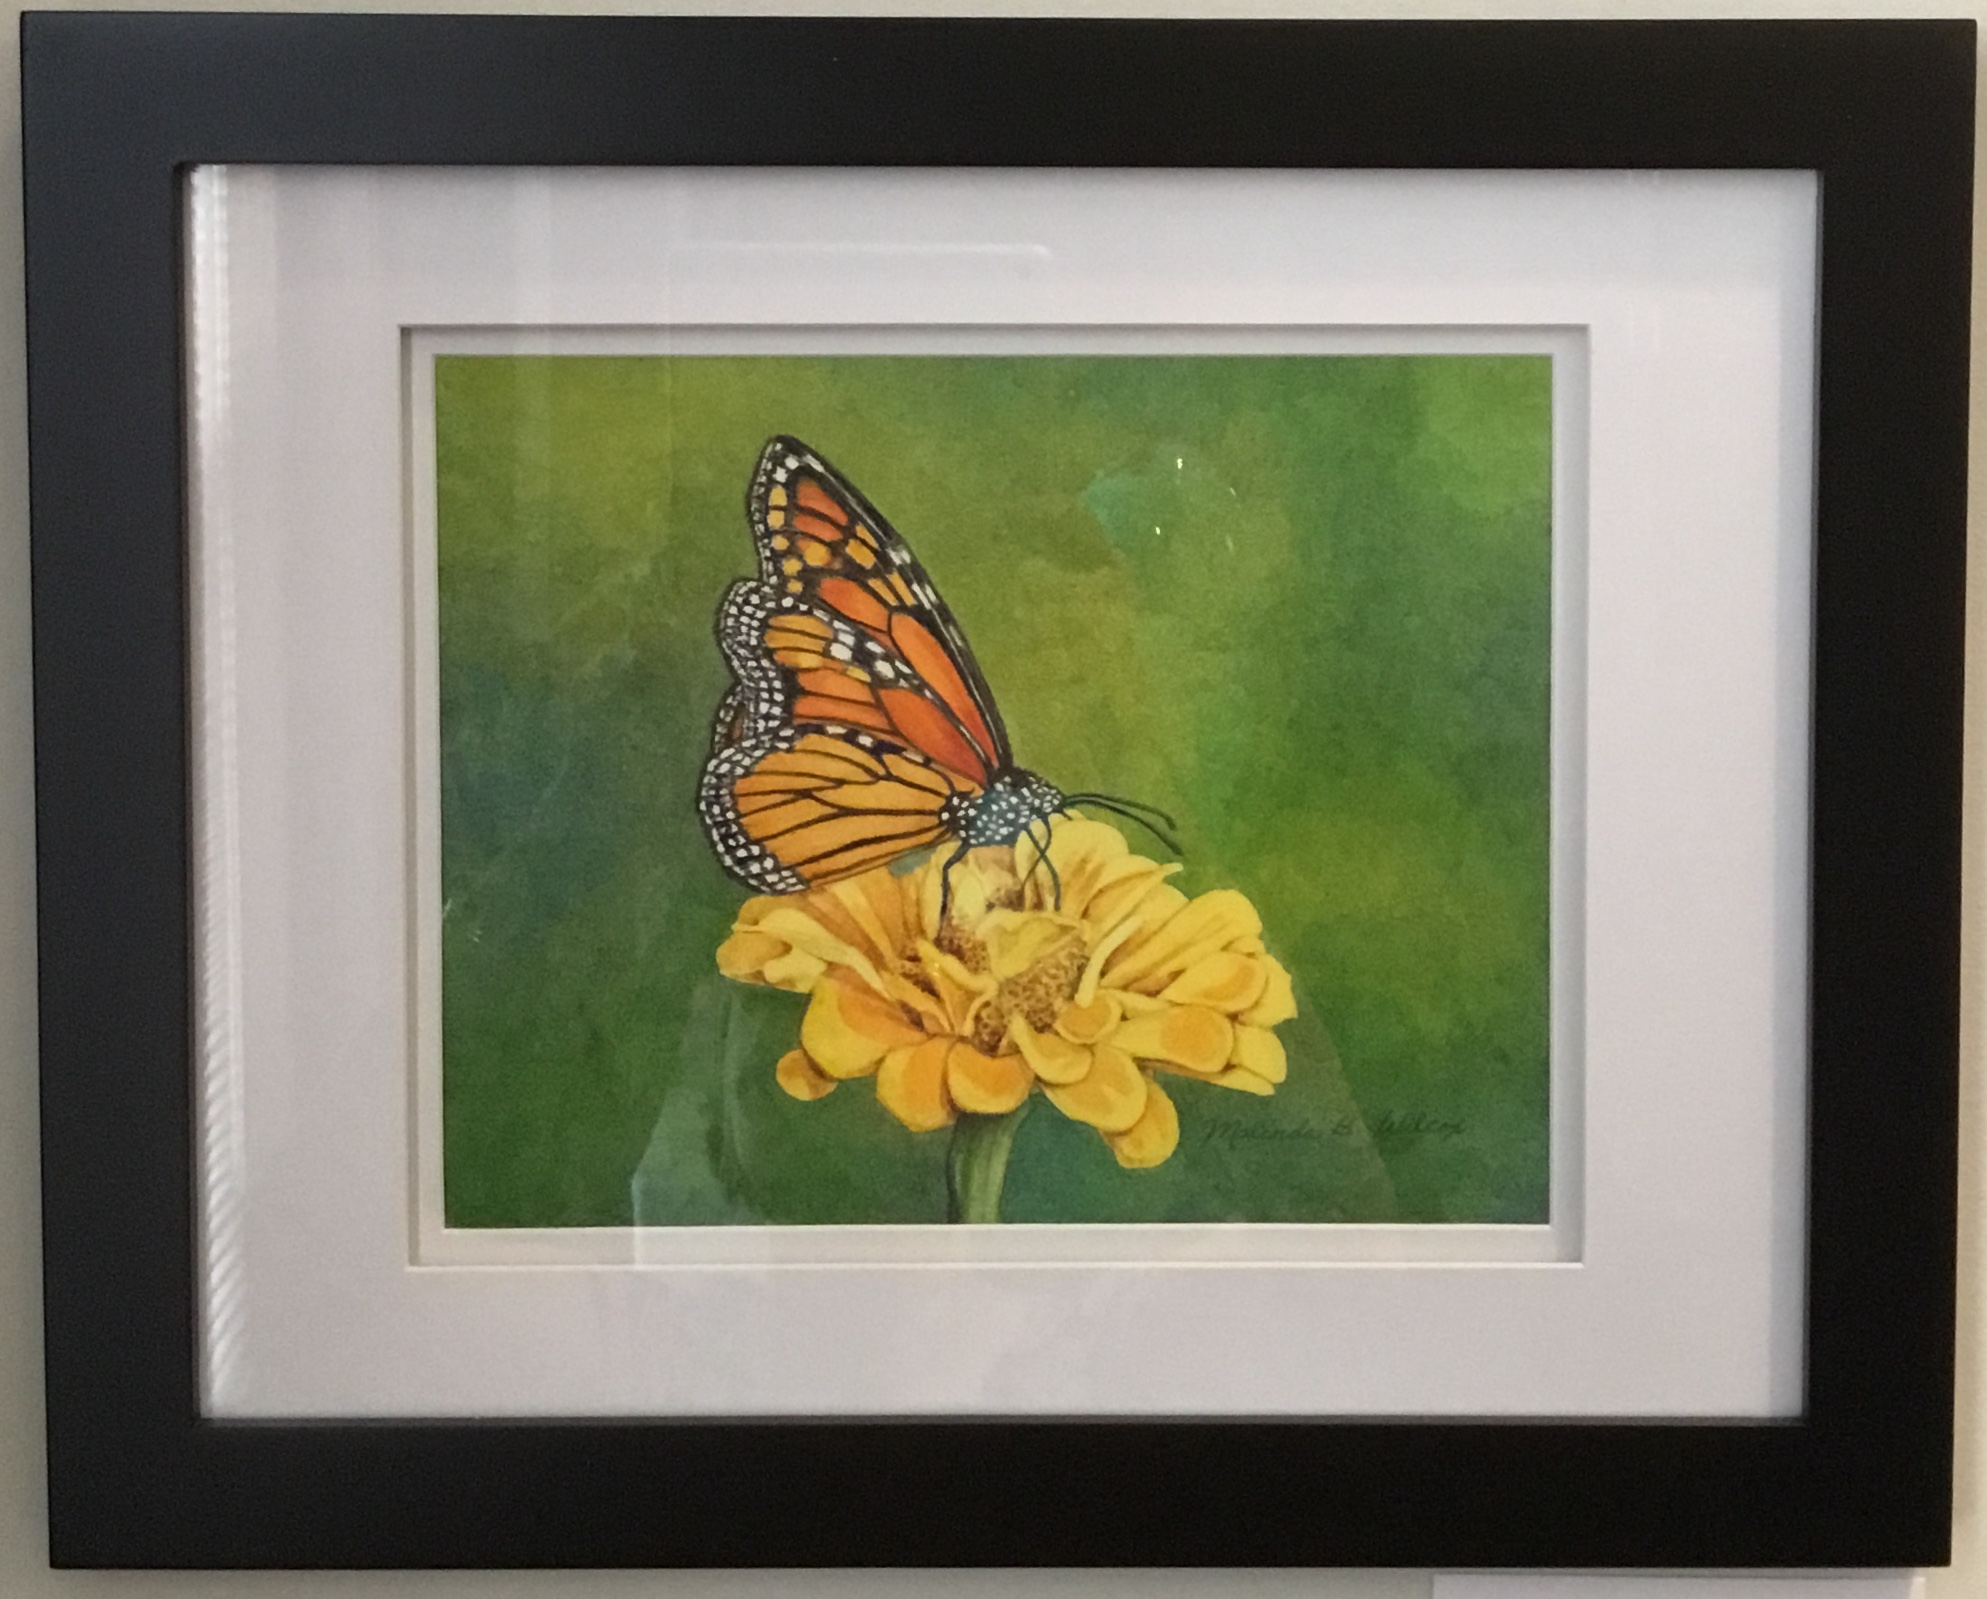 Monarch on Yellow Flower
Watercolor
8"x10"
$275.